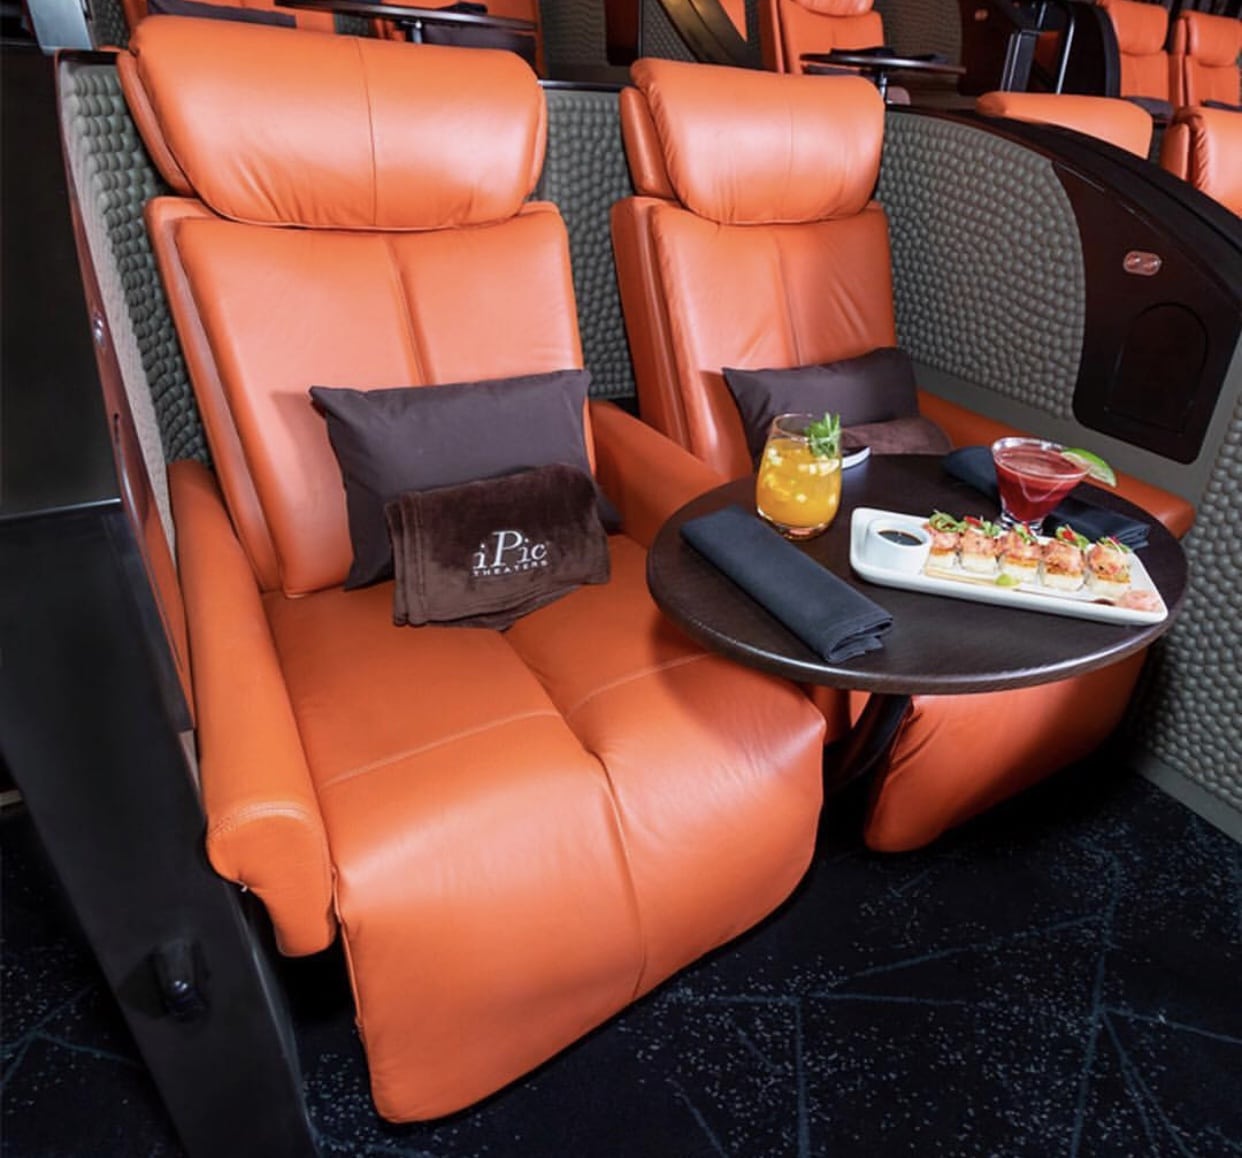 ipic theaters new jersey fort lee